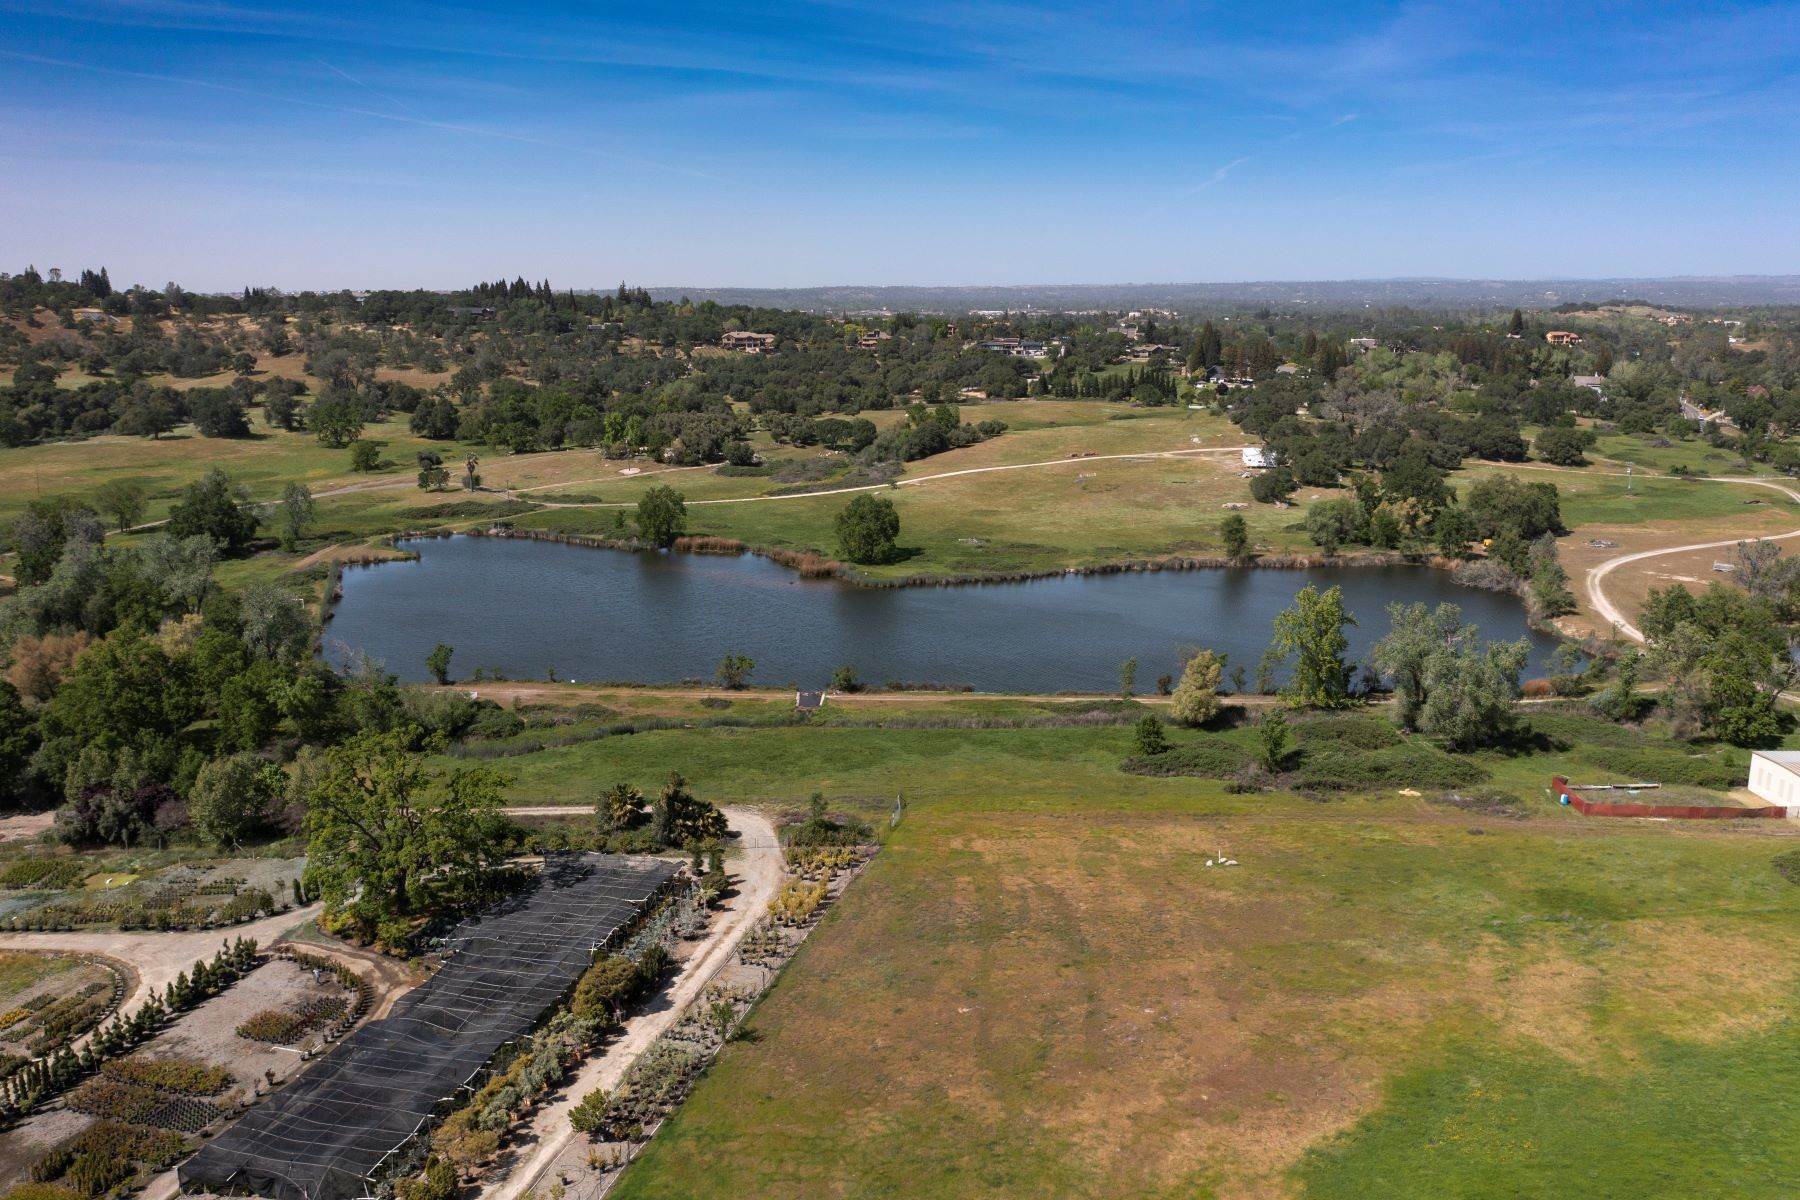 Single Family Homes for Sale at 5575 Cavitt Stallman Road, Granite Bay, CA 95746 5575 Cavitt Stallman Road Granite Bay, California 95746 United States